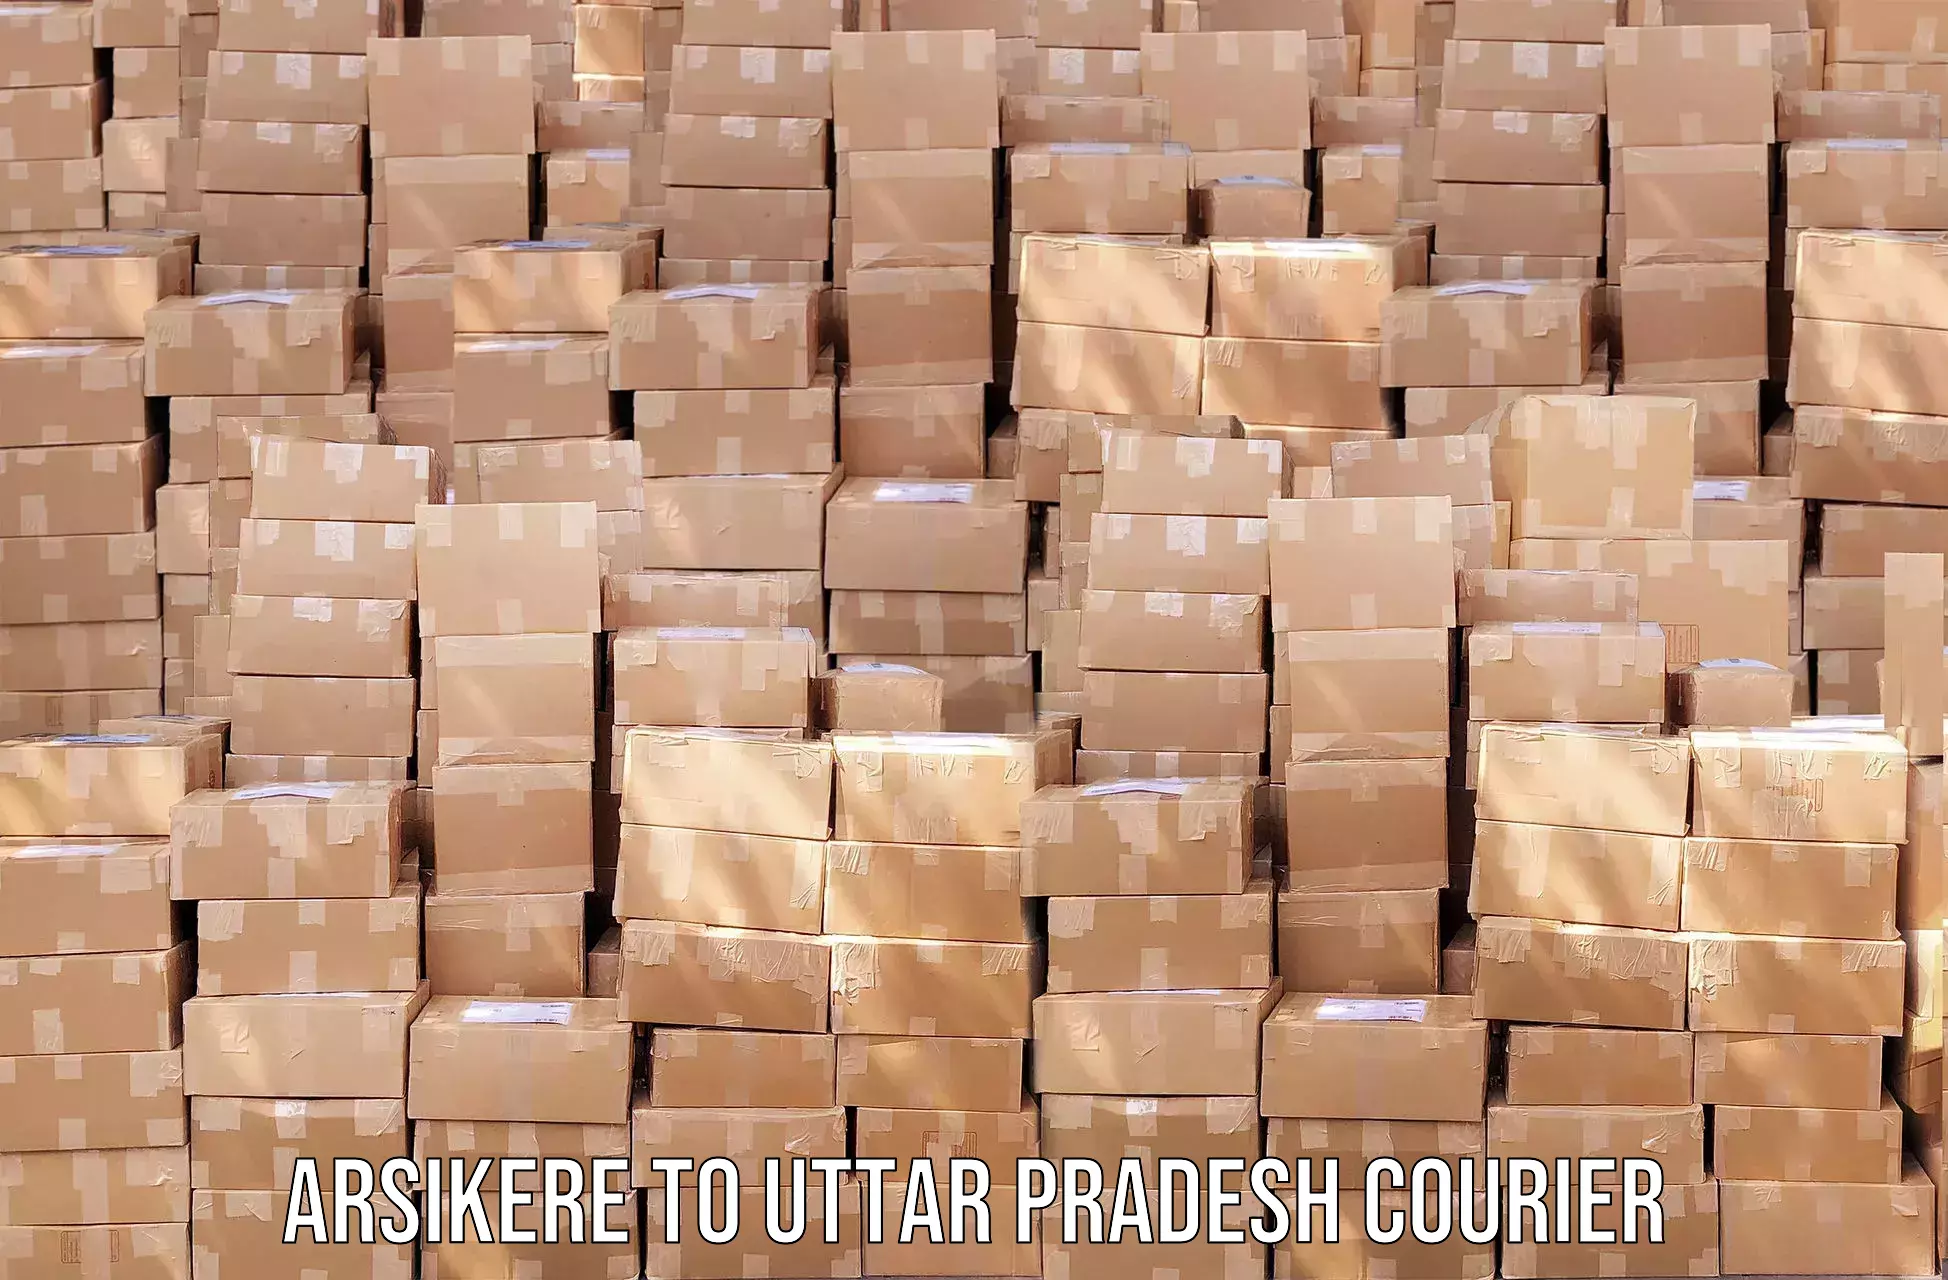 Personalized courier experiences Arsikere to Uttar Pradesh